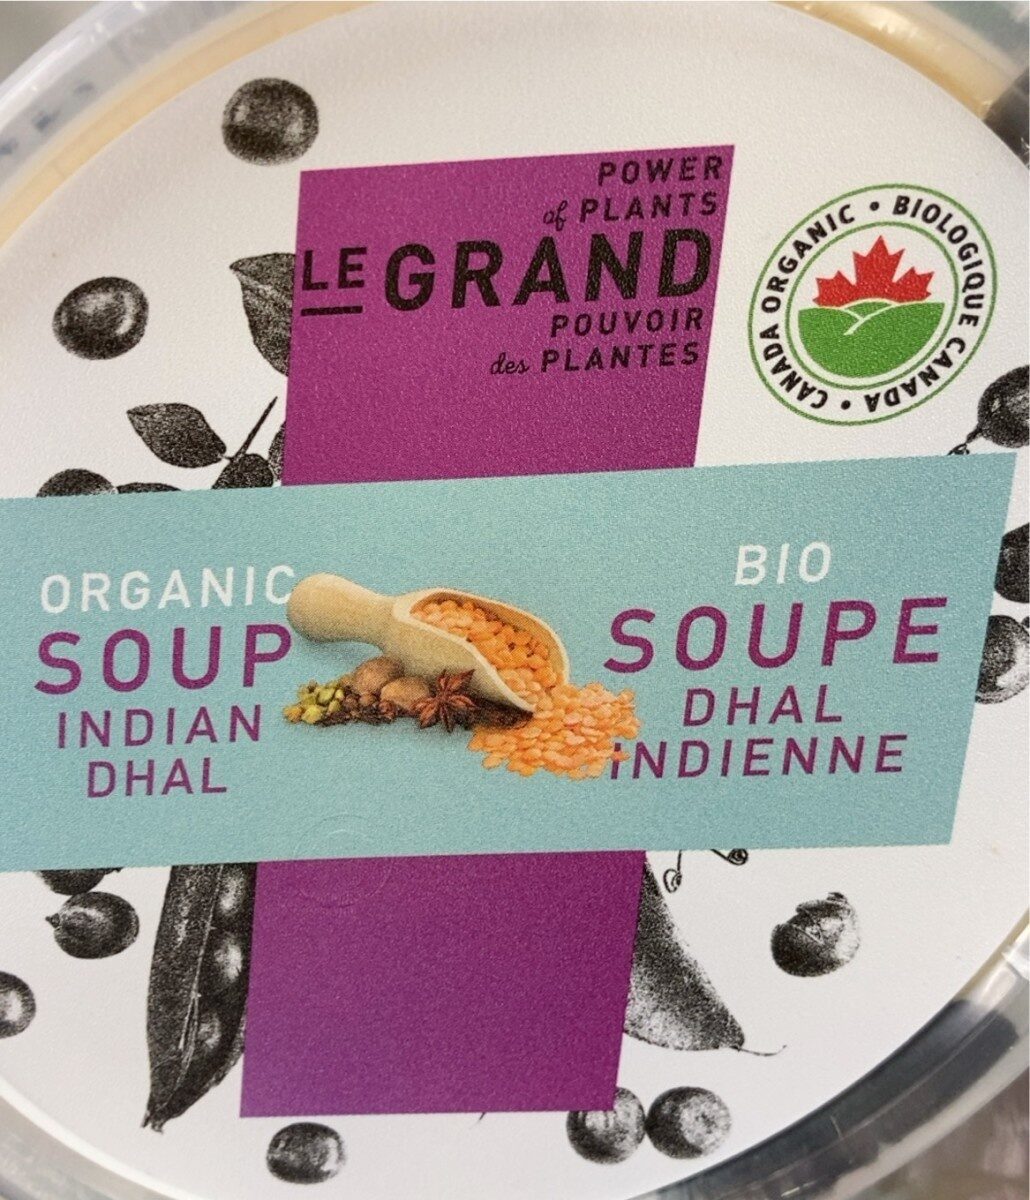 Soupe dhal indienne - Product - fr